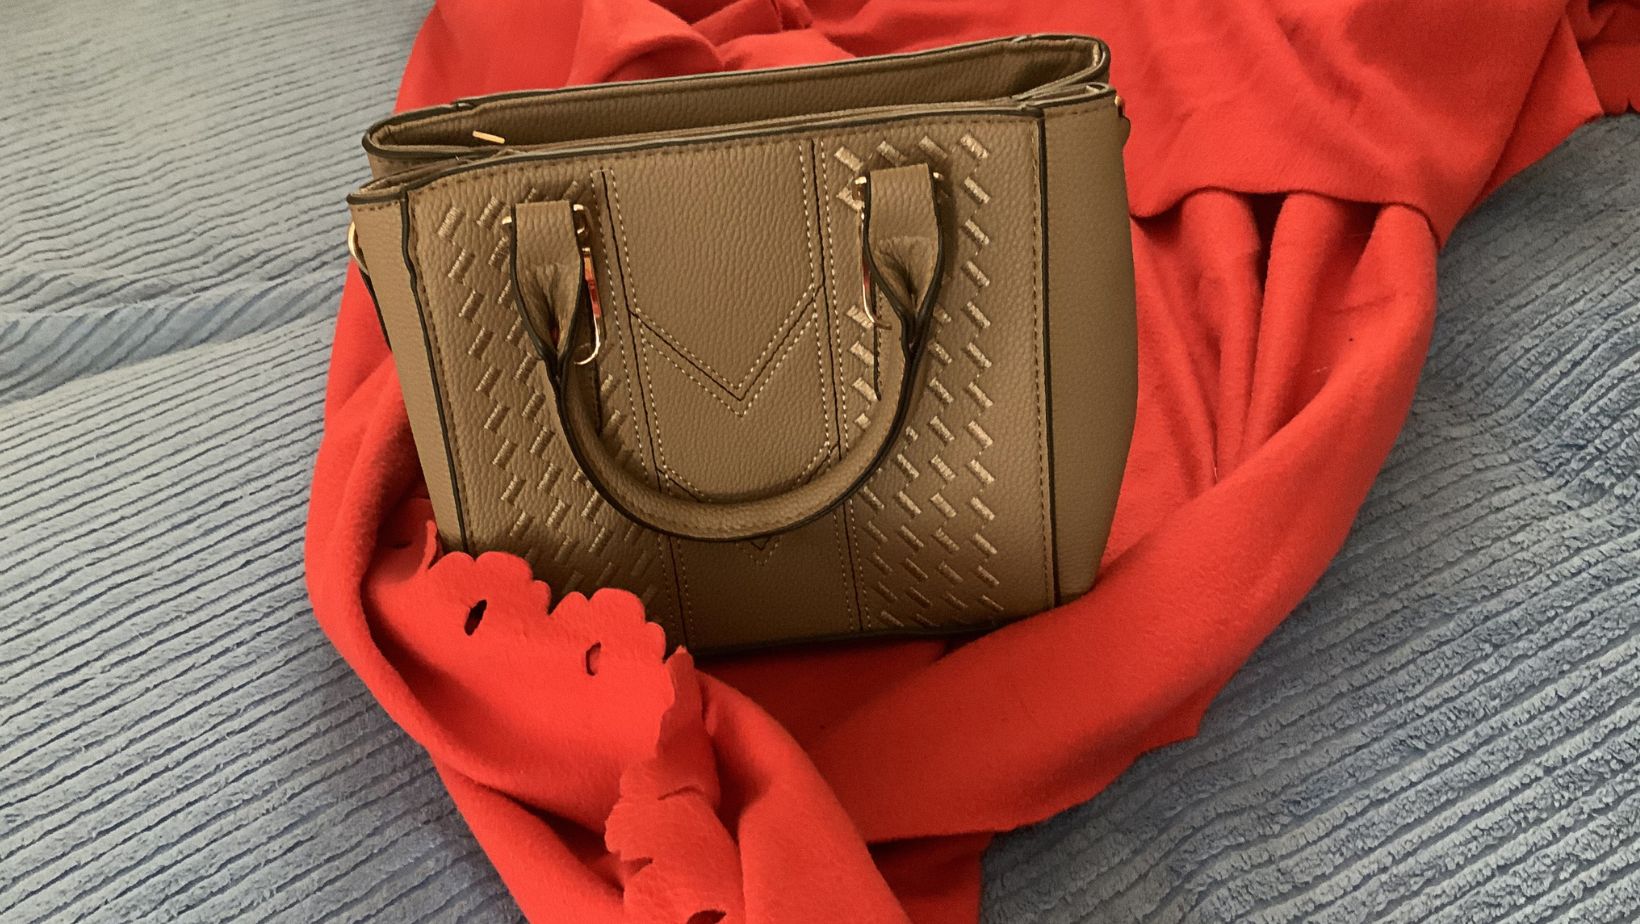 Things to Consider When Looking for a Handbag Manufacturer